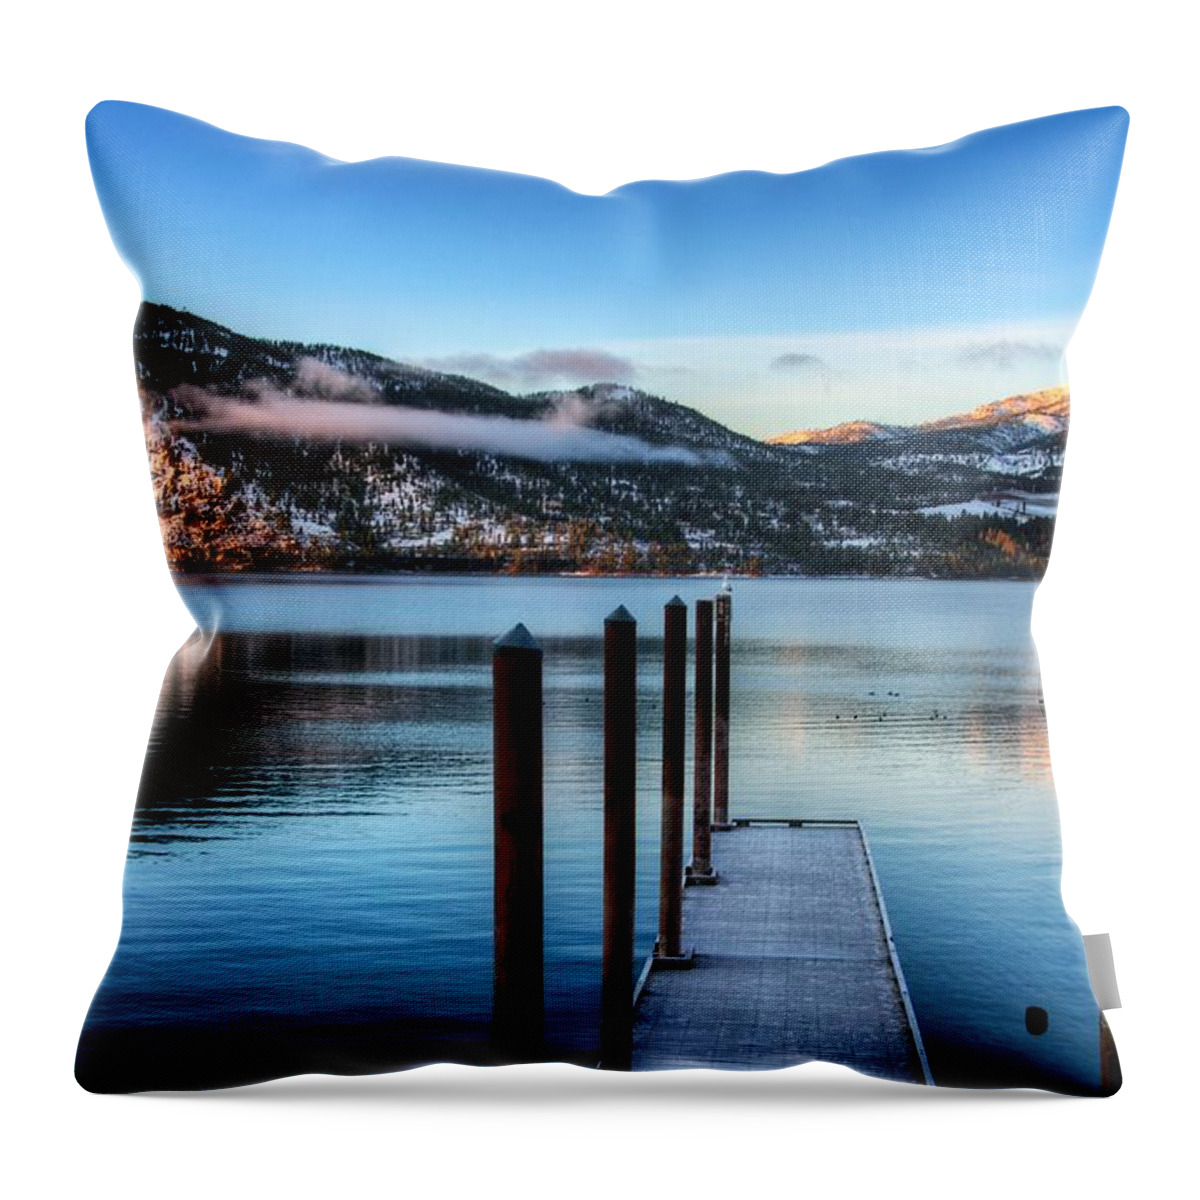 Lake Chelan Throw Pillow featuring the photograph Wapato Point by Spencer McDonald